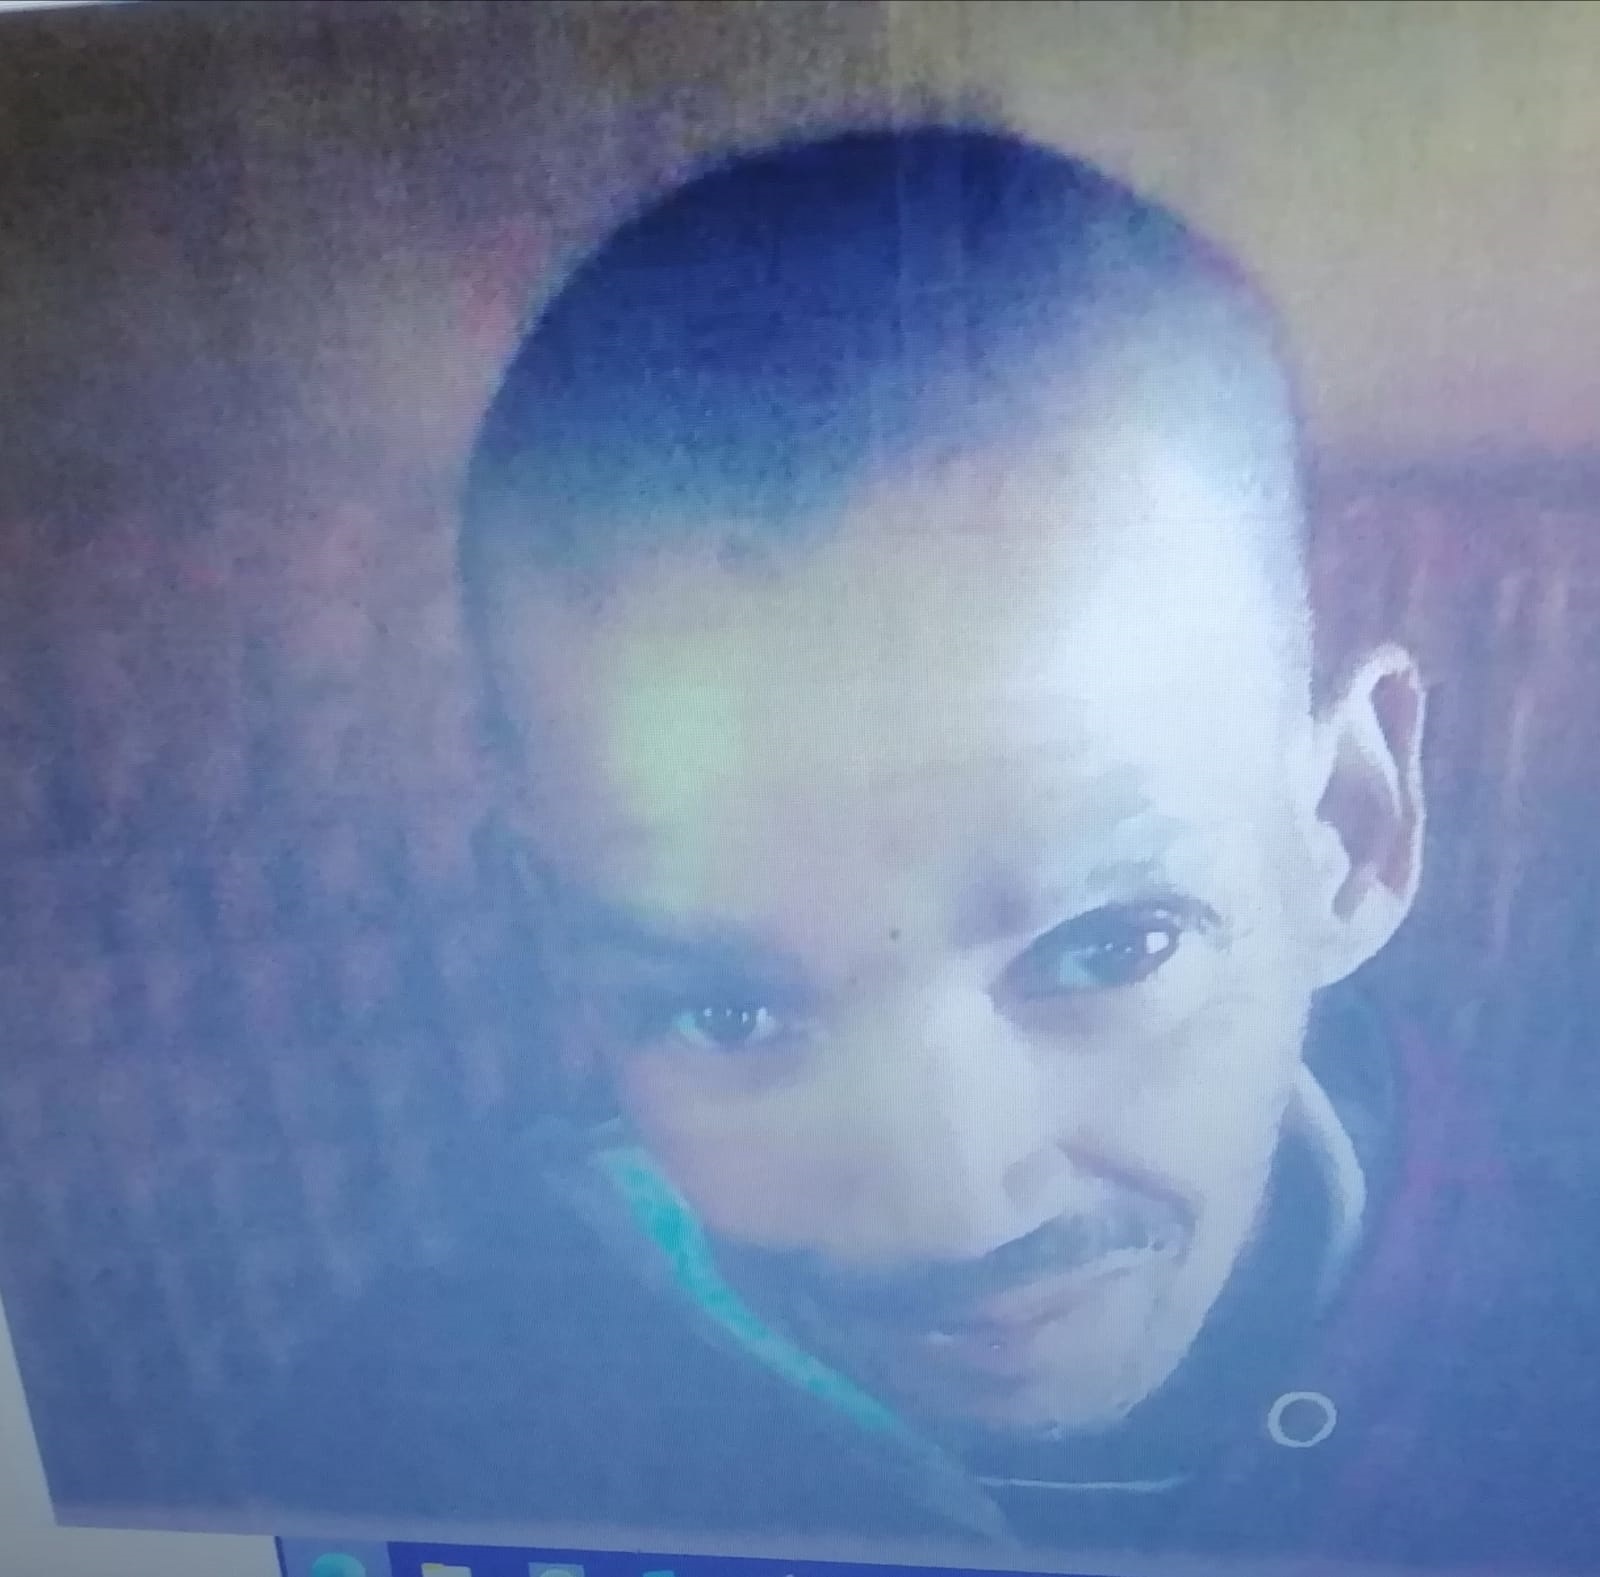 SAPS Kwadwesi detectives are seeking the community’s assistance in tracing a 60-year-old Kwadwesi man